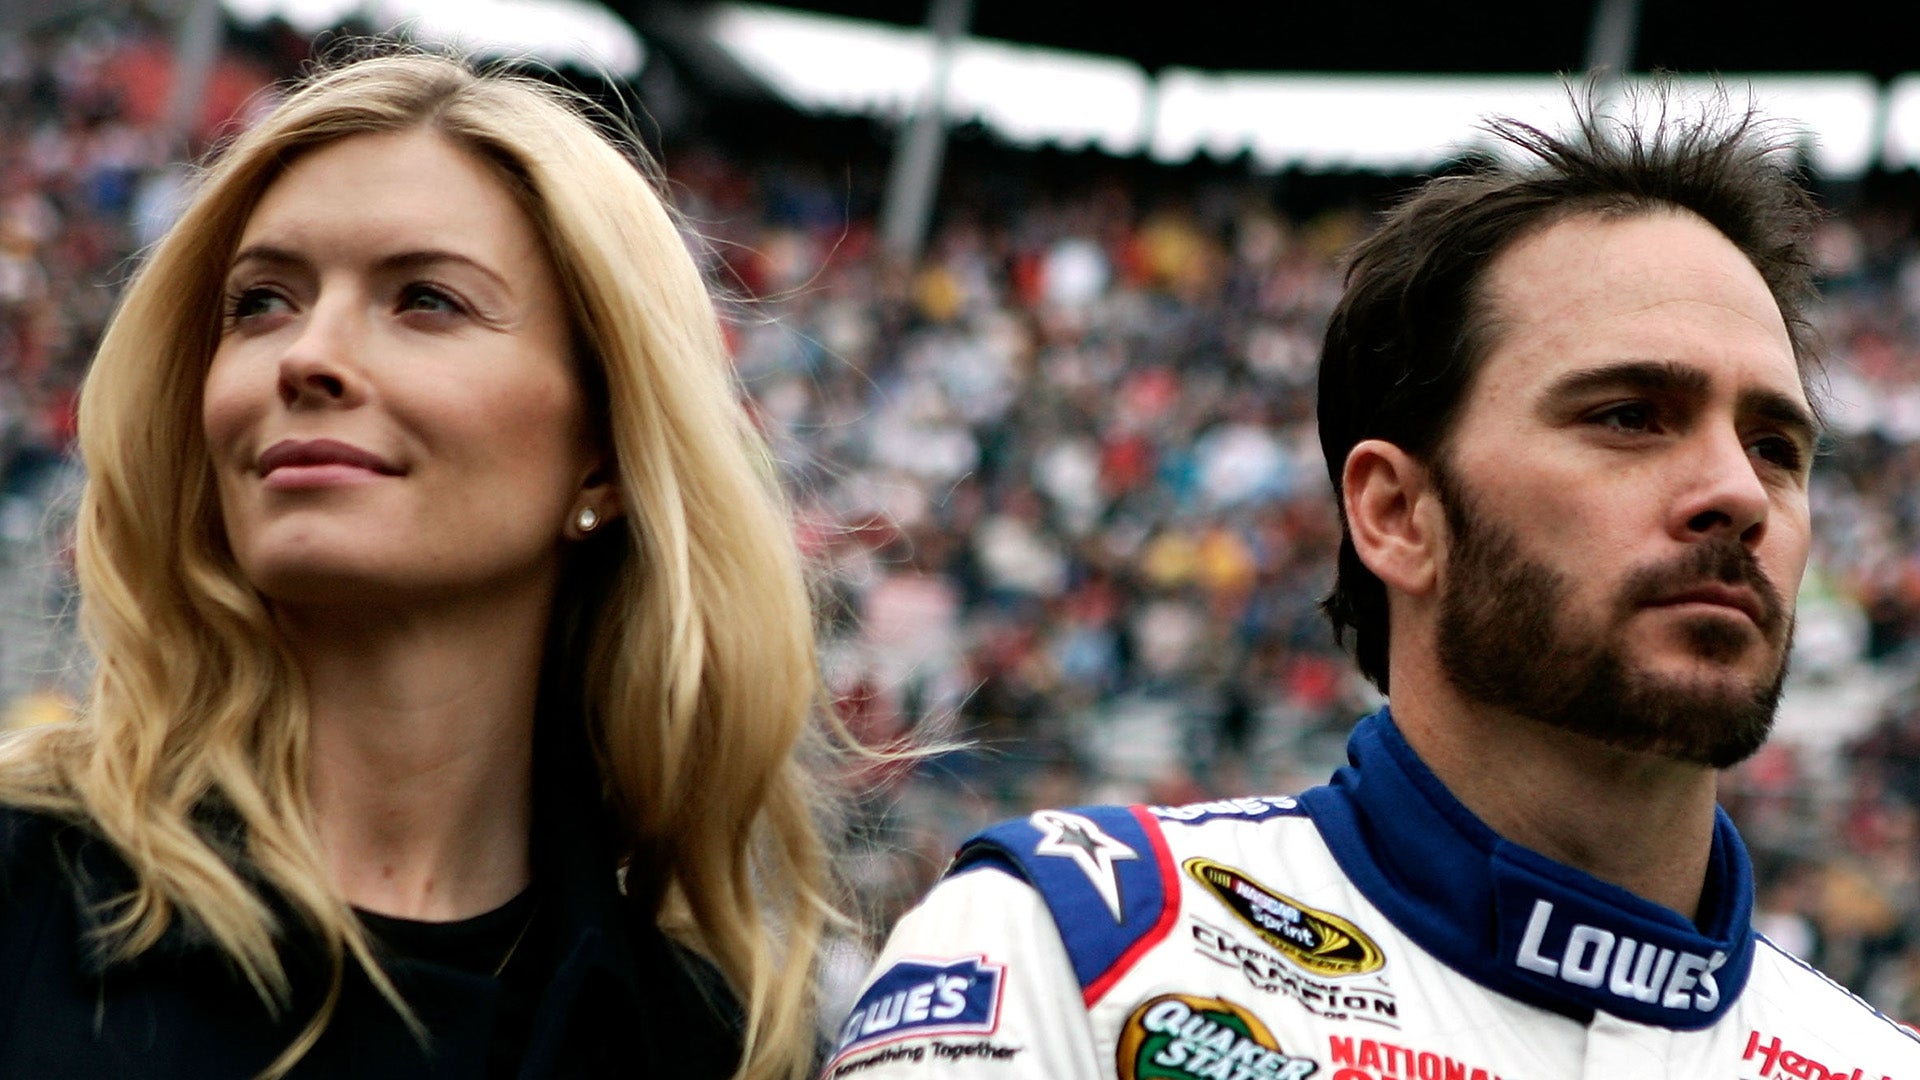 NASCAR Star Jimmie Johnson's In-Laws and Nephew Dead in Apparent Murder-Suicide